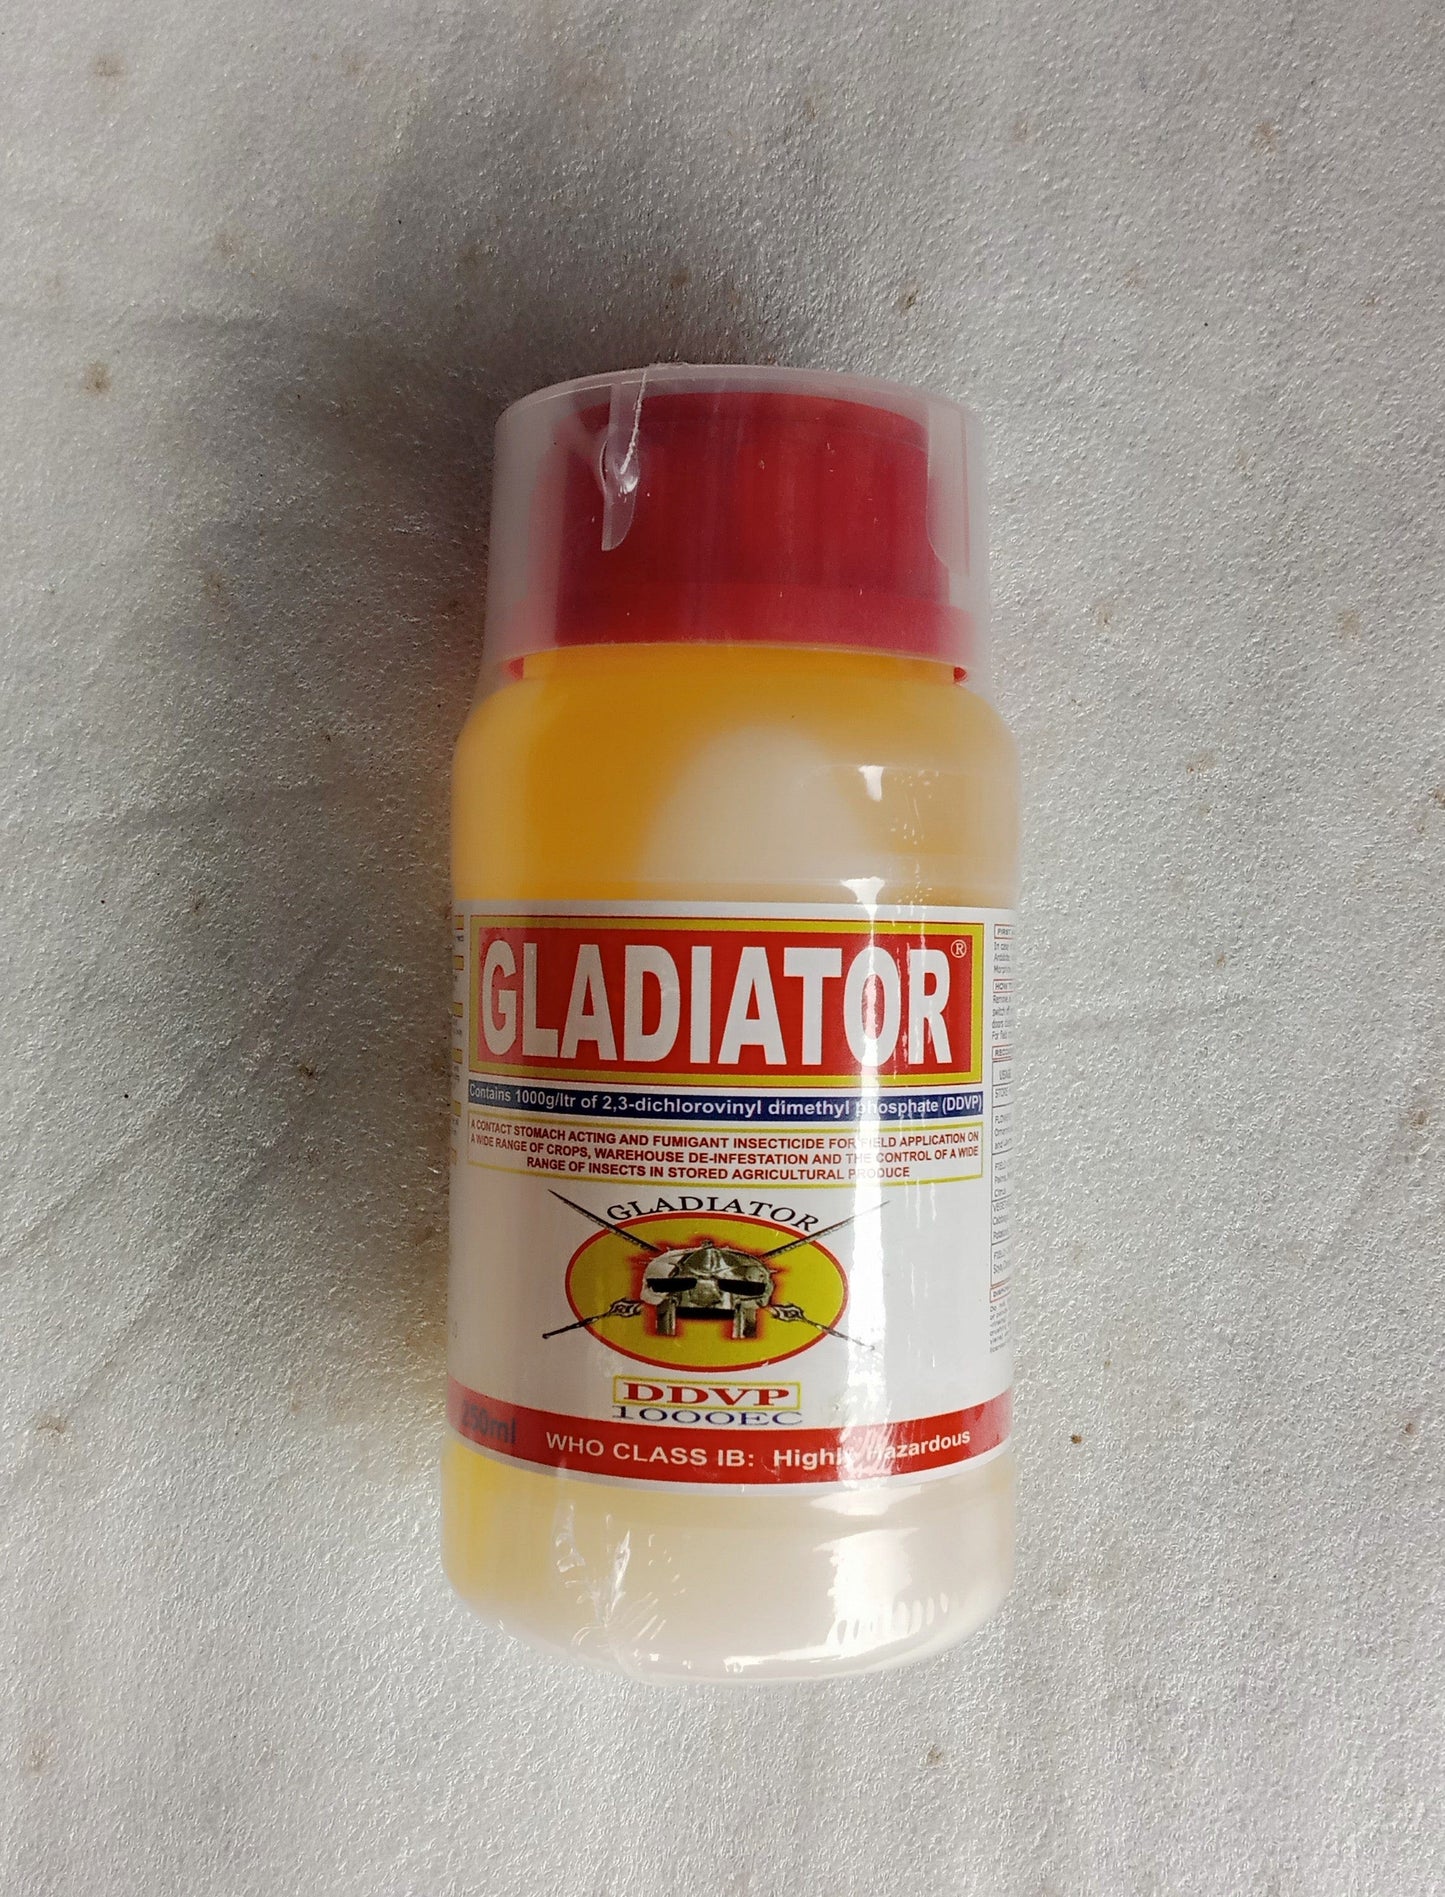 DDVP Insecticides Agro-toolz Gladiator 250ml